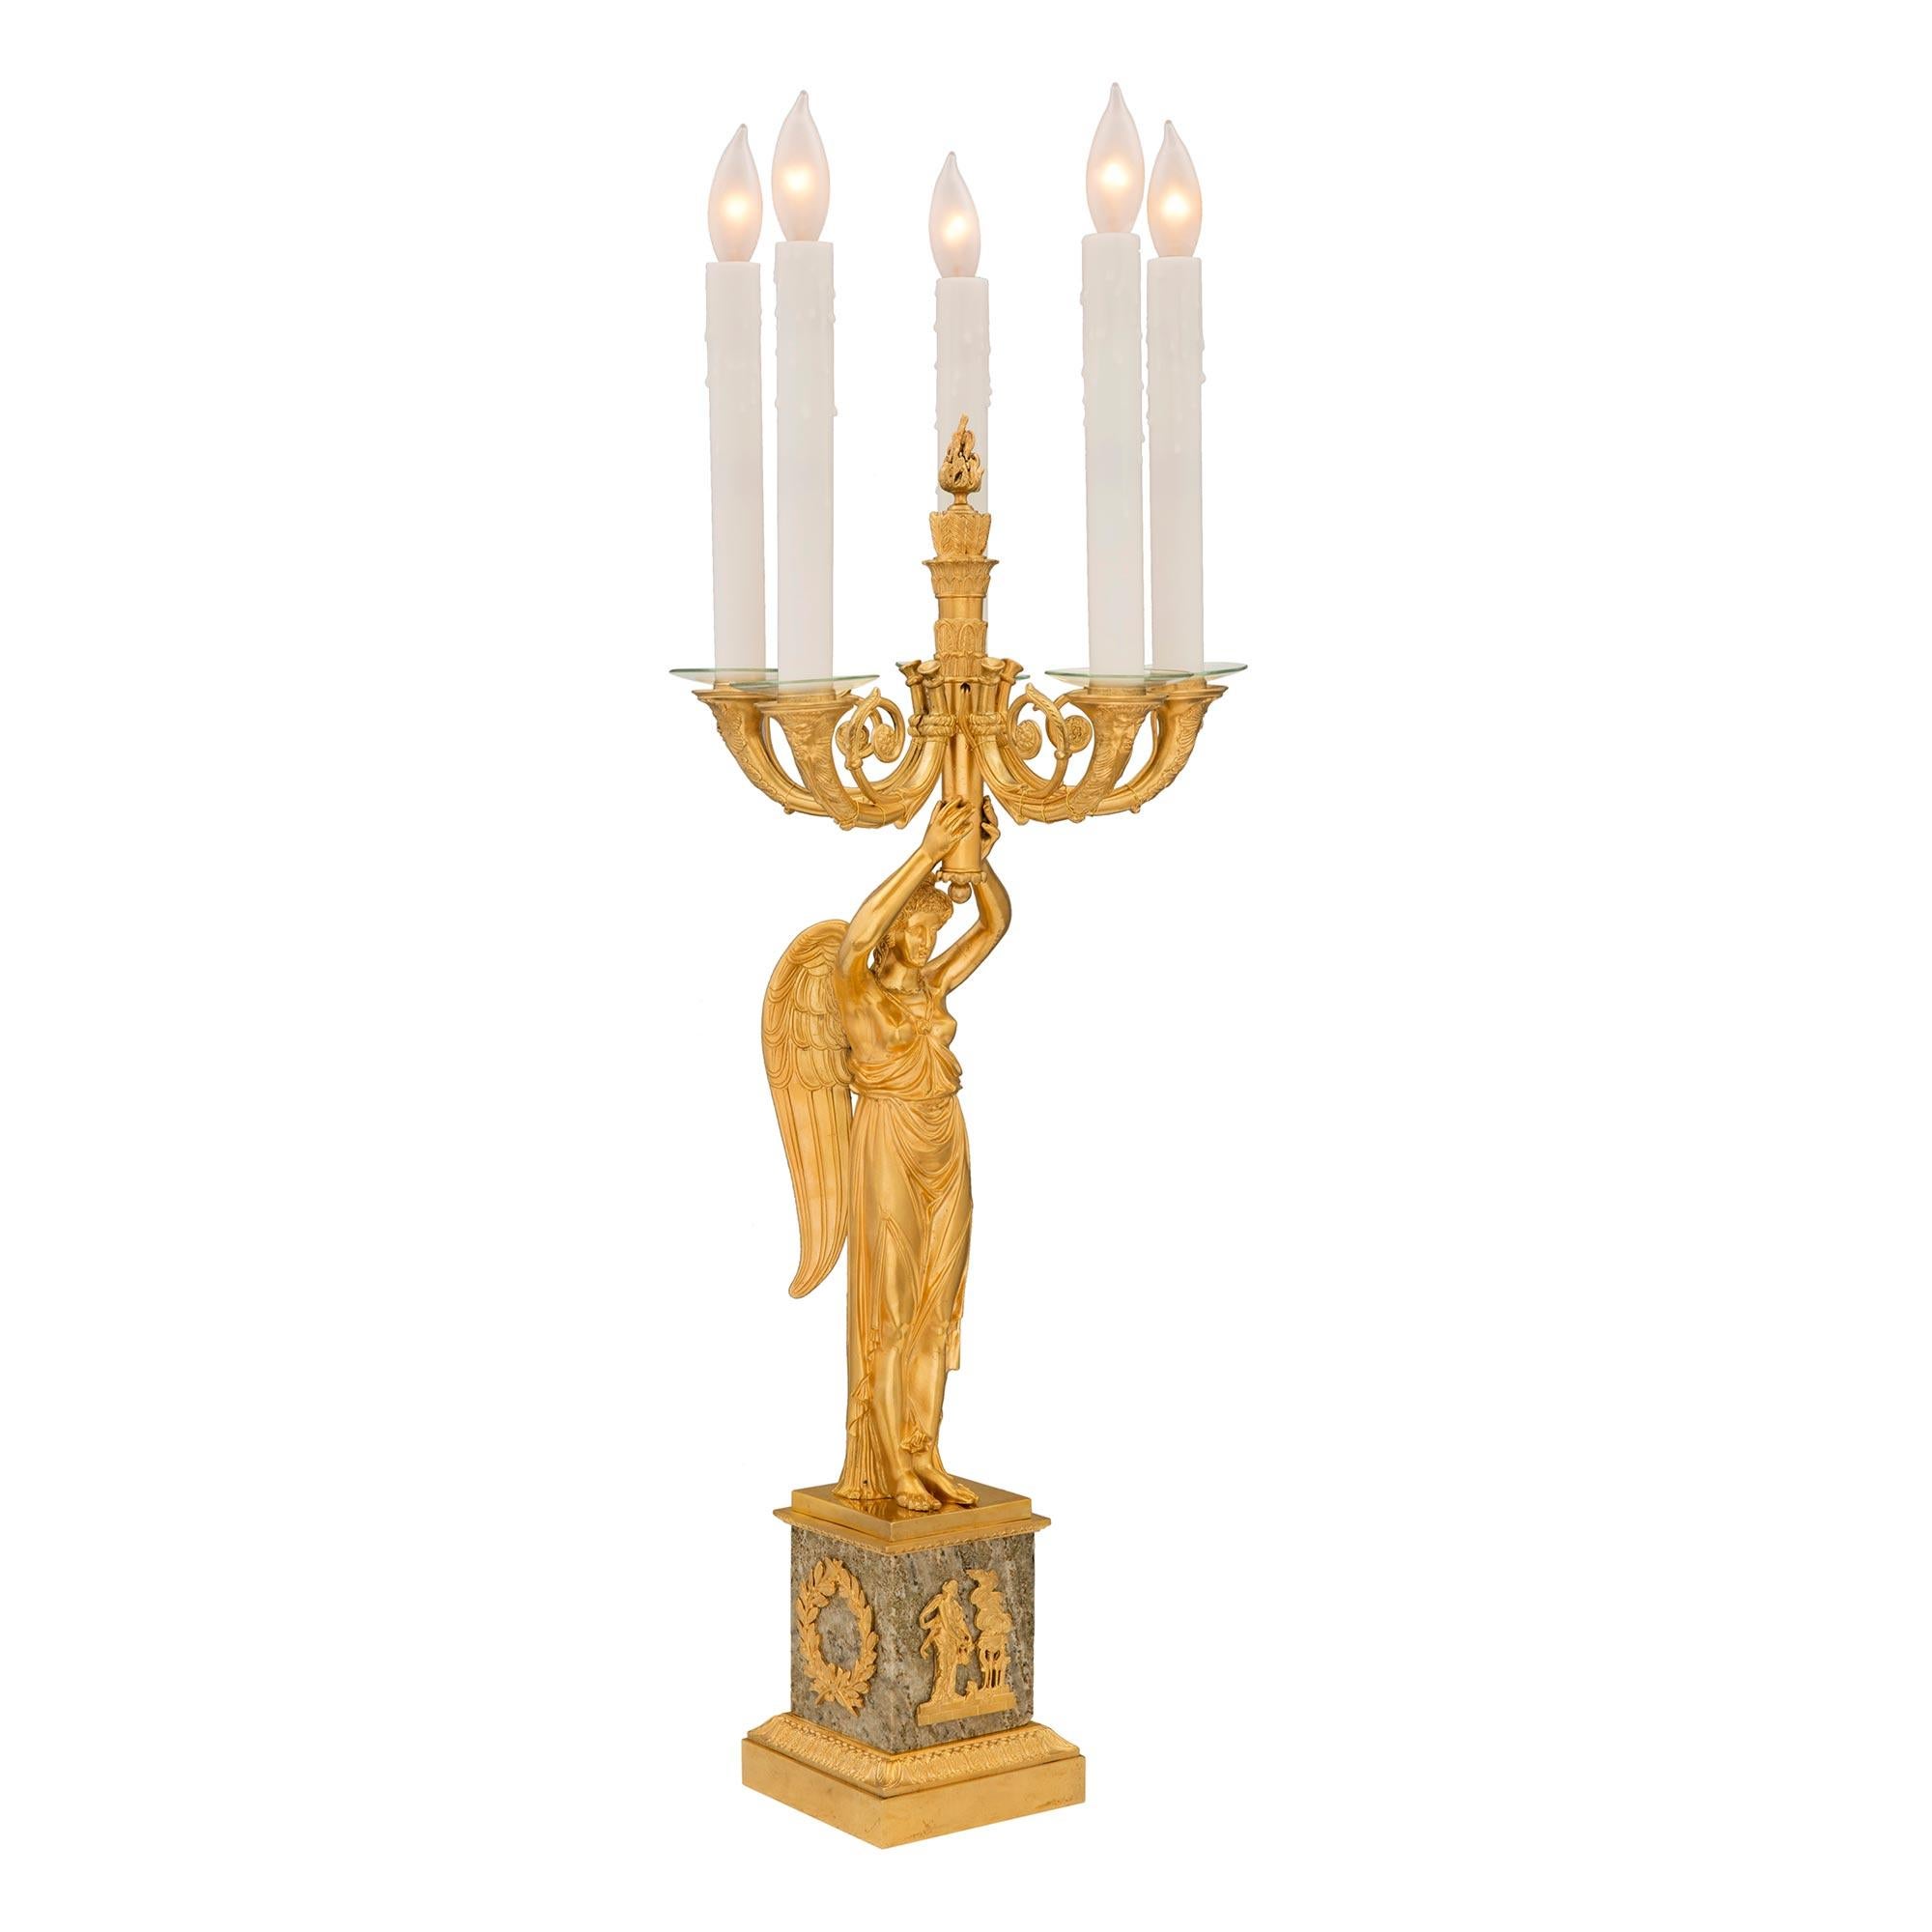 An exquisite true pair of French 19th century Empire st. ormolu and granite five arm lamps, after a model by Claude Galle. Each lamp is raised by a square granite base with a beautiful stepped ormolu foliate wrap around band and richly chased laurel